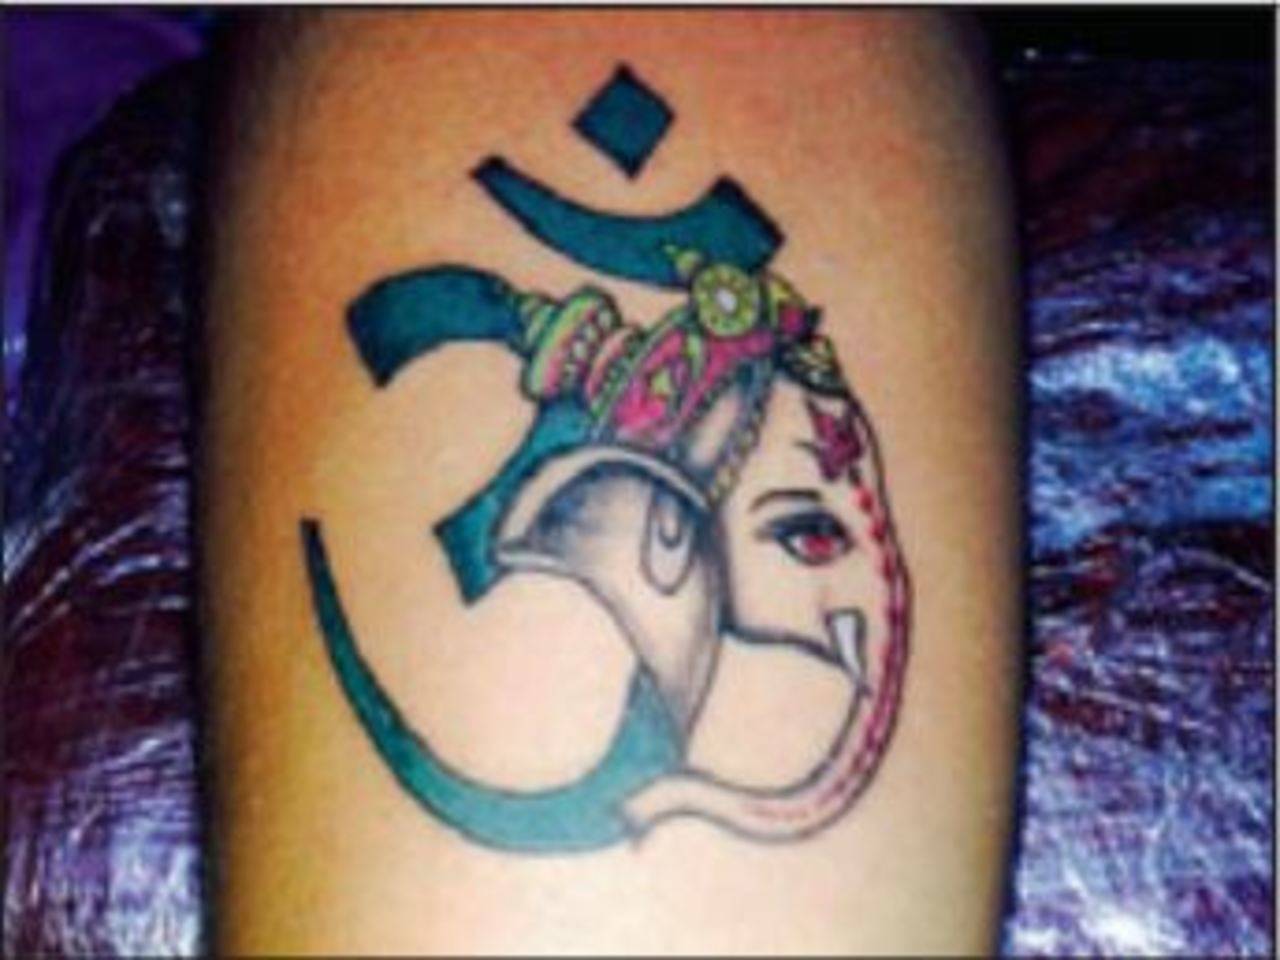 Gods make it to tattoo themes in Lord Shiva's abode | Varanasi News - Times  of India